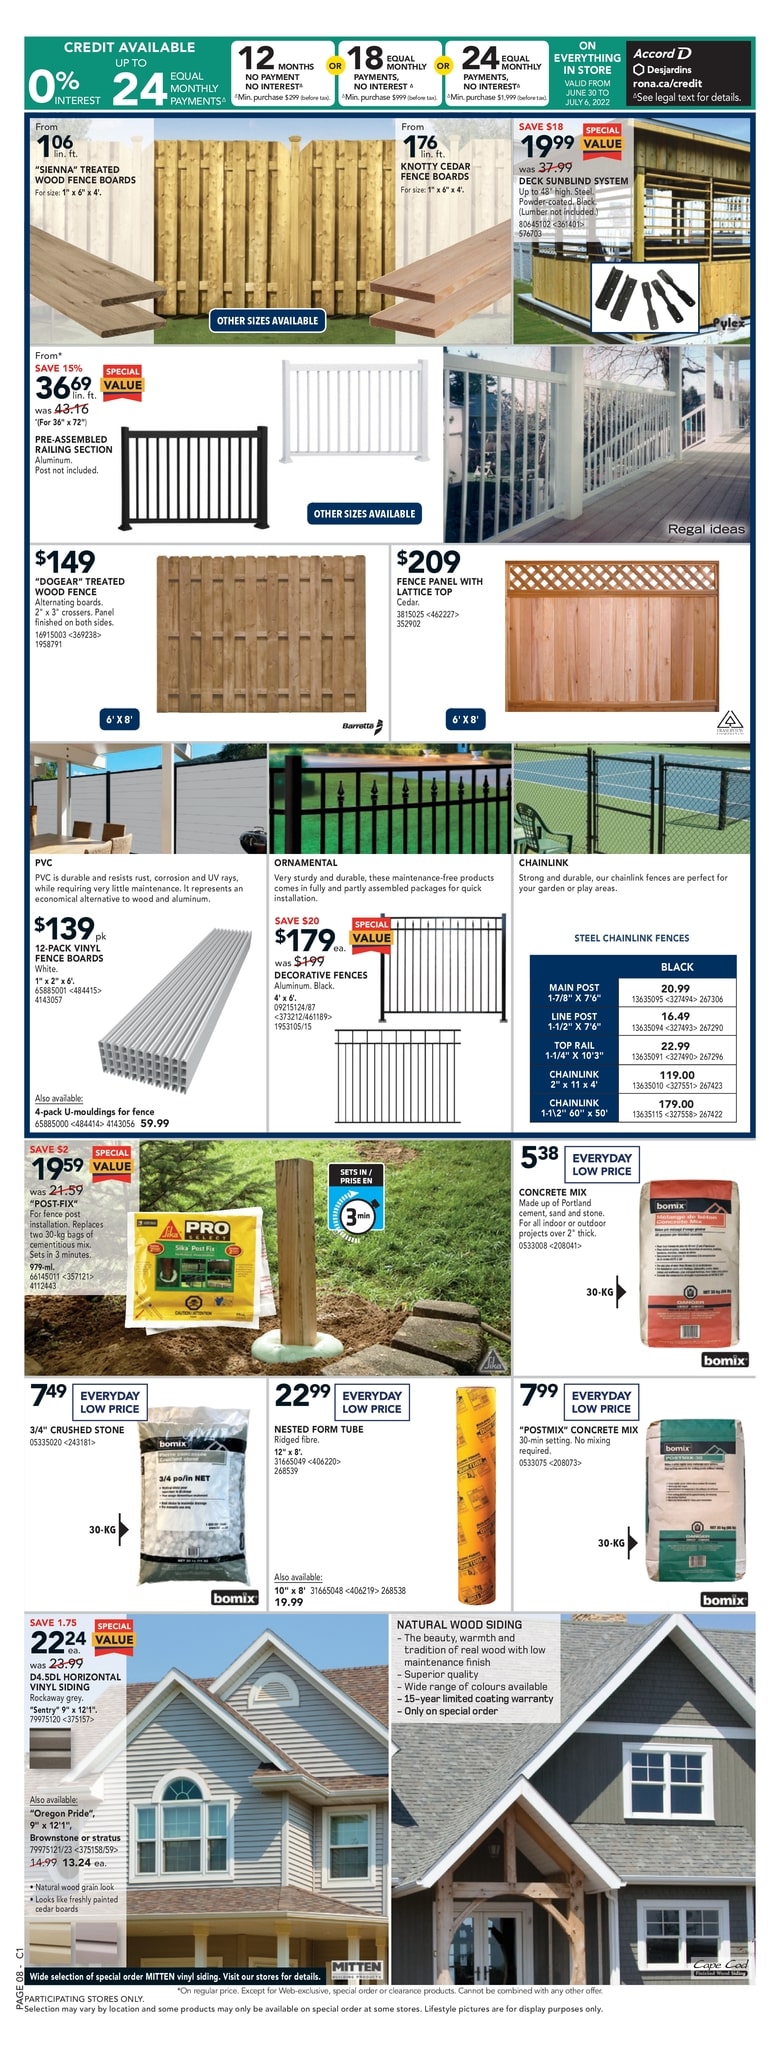 Rona - Weekly Flyer Specials - Page 11